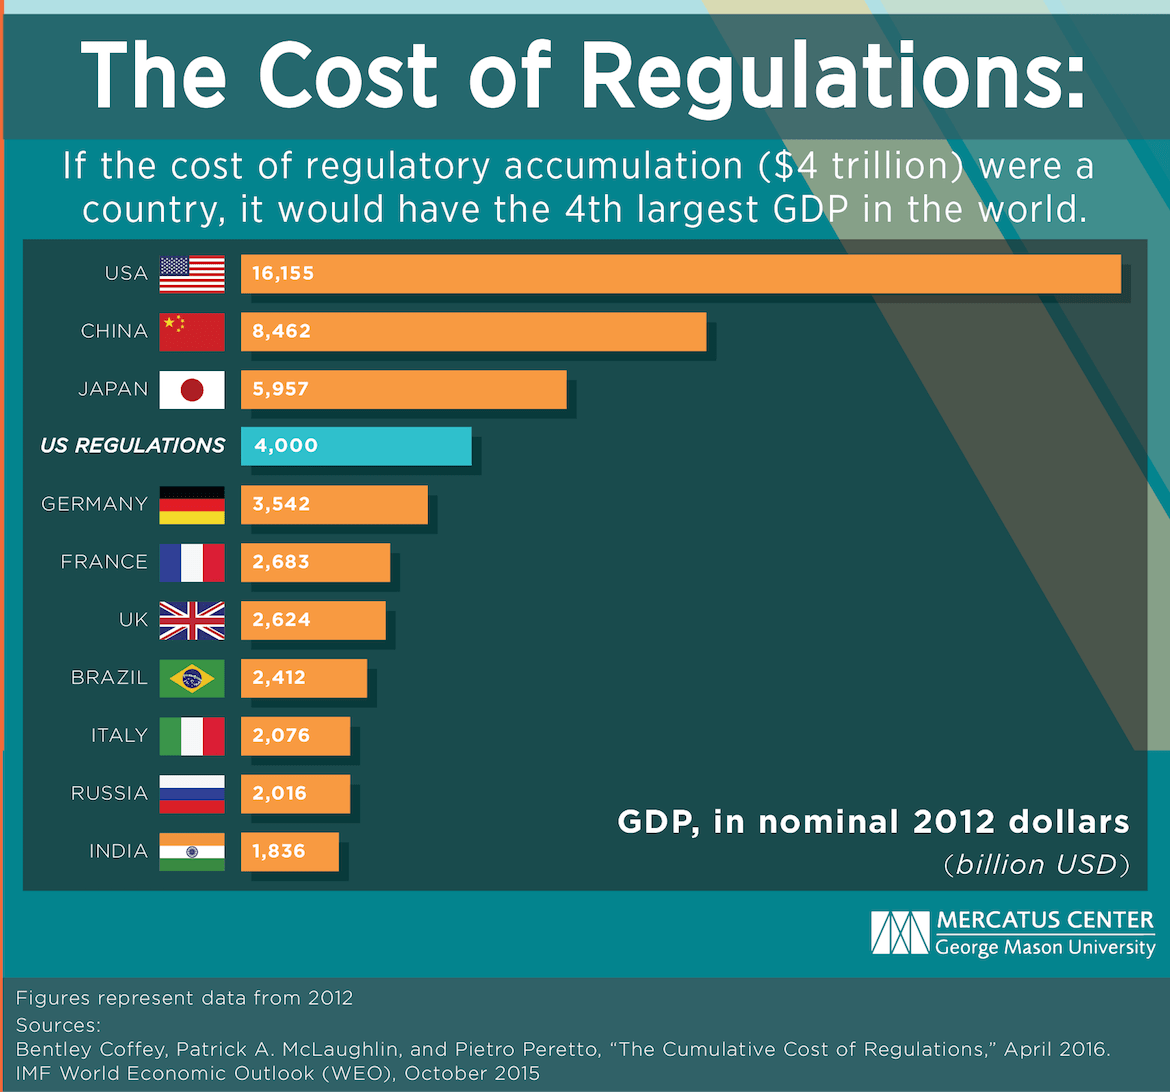 McLaughlin-Cost-of-Regs-as-a-Country-chart-v1_0-copy